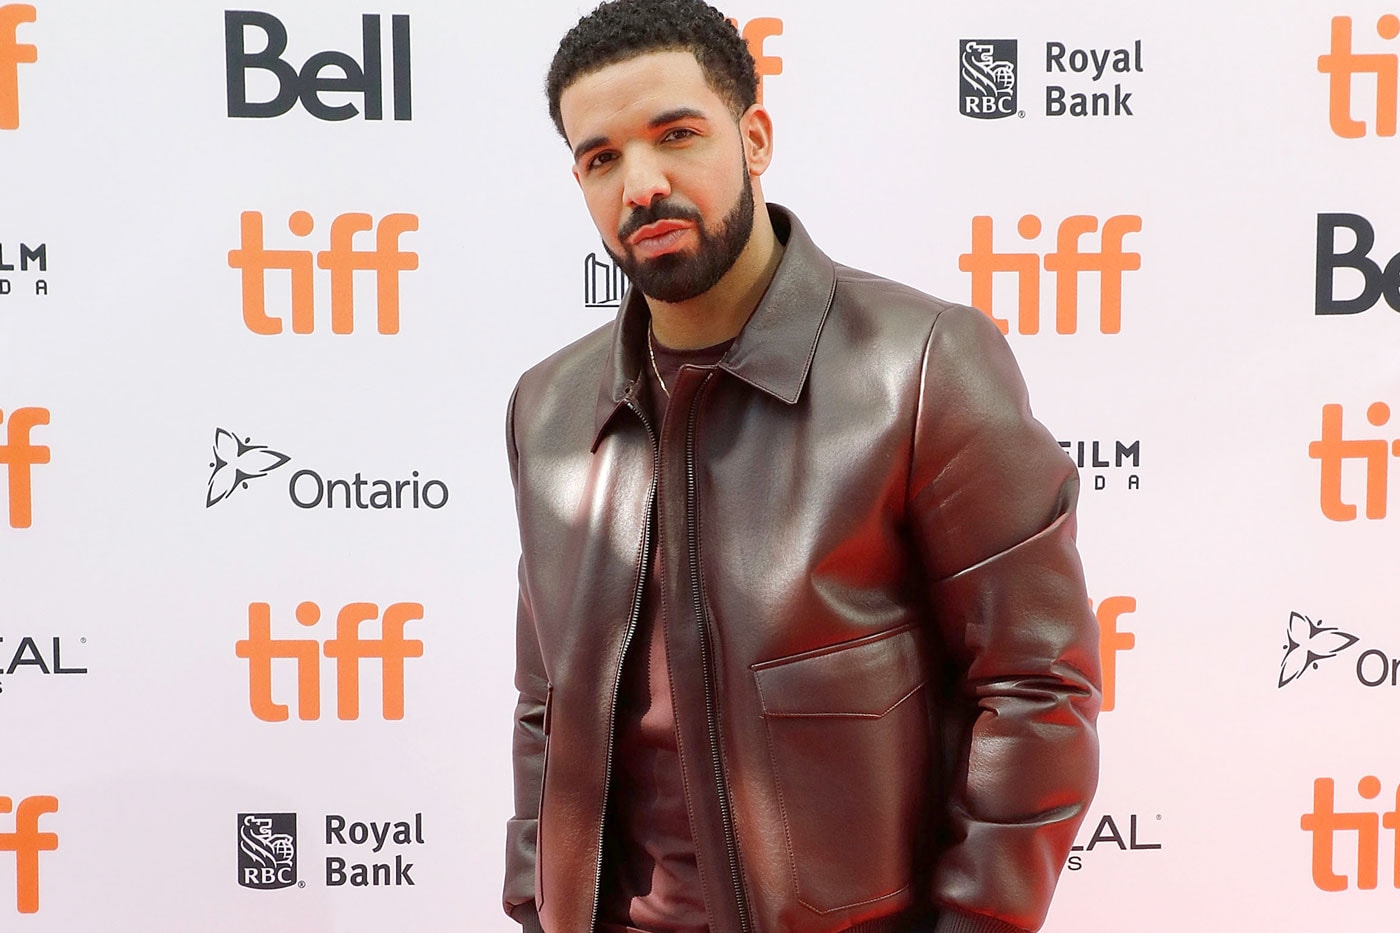 Drake Says He "Got Something" For Eminem If He Releases a Diss Track